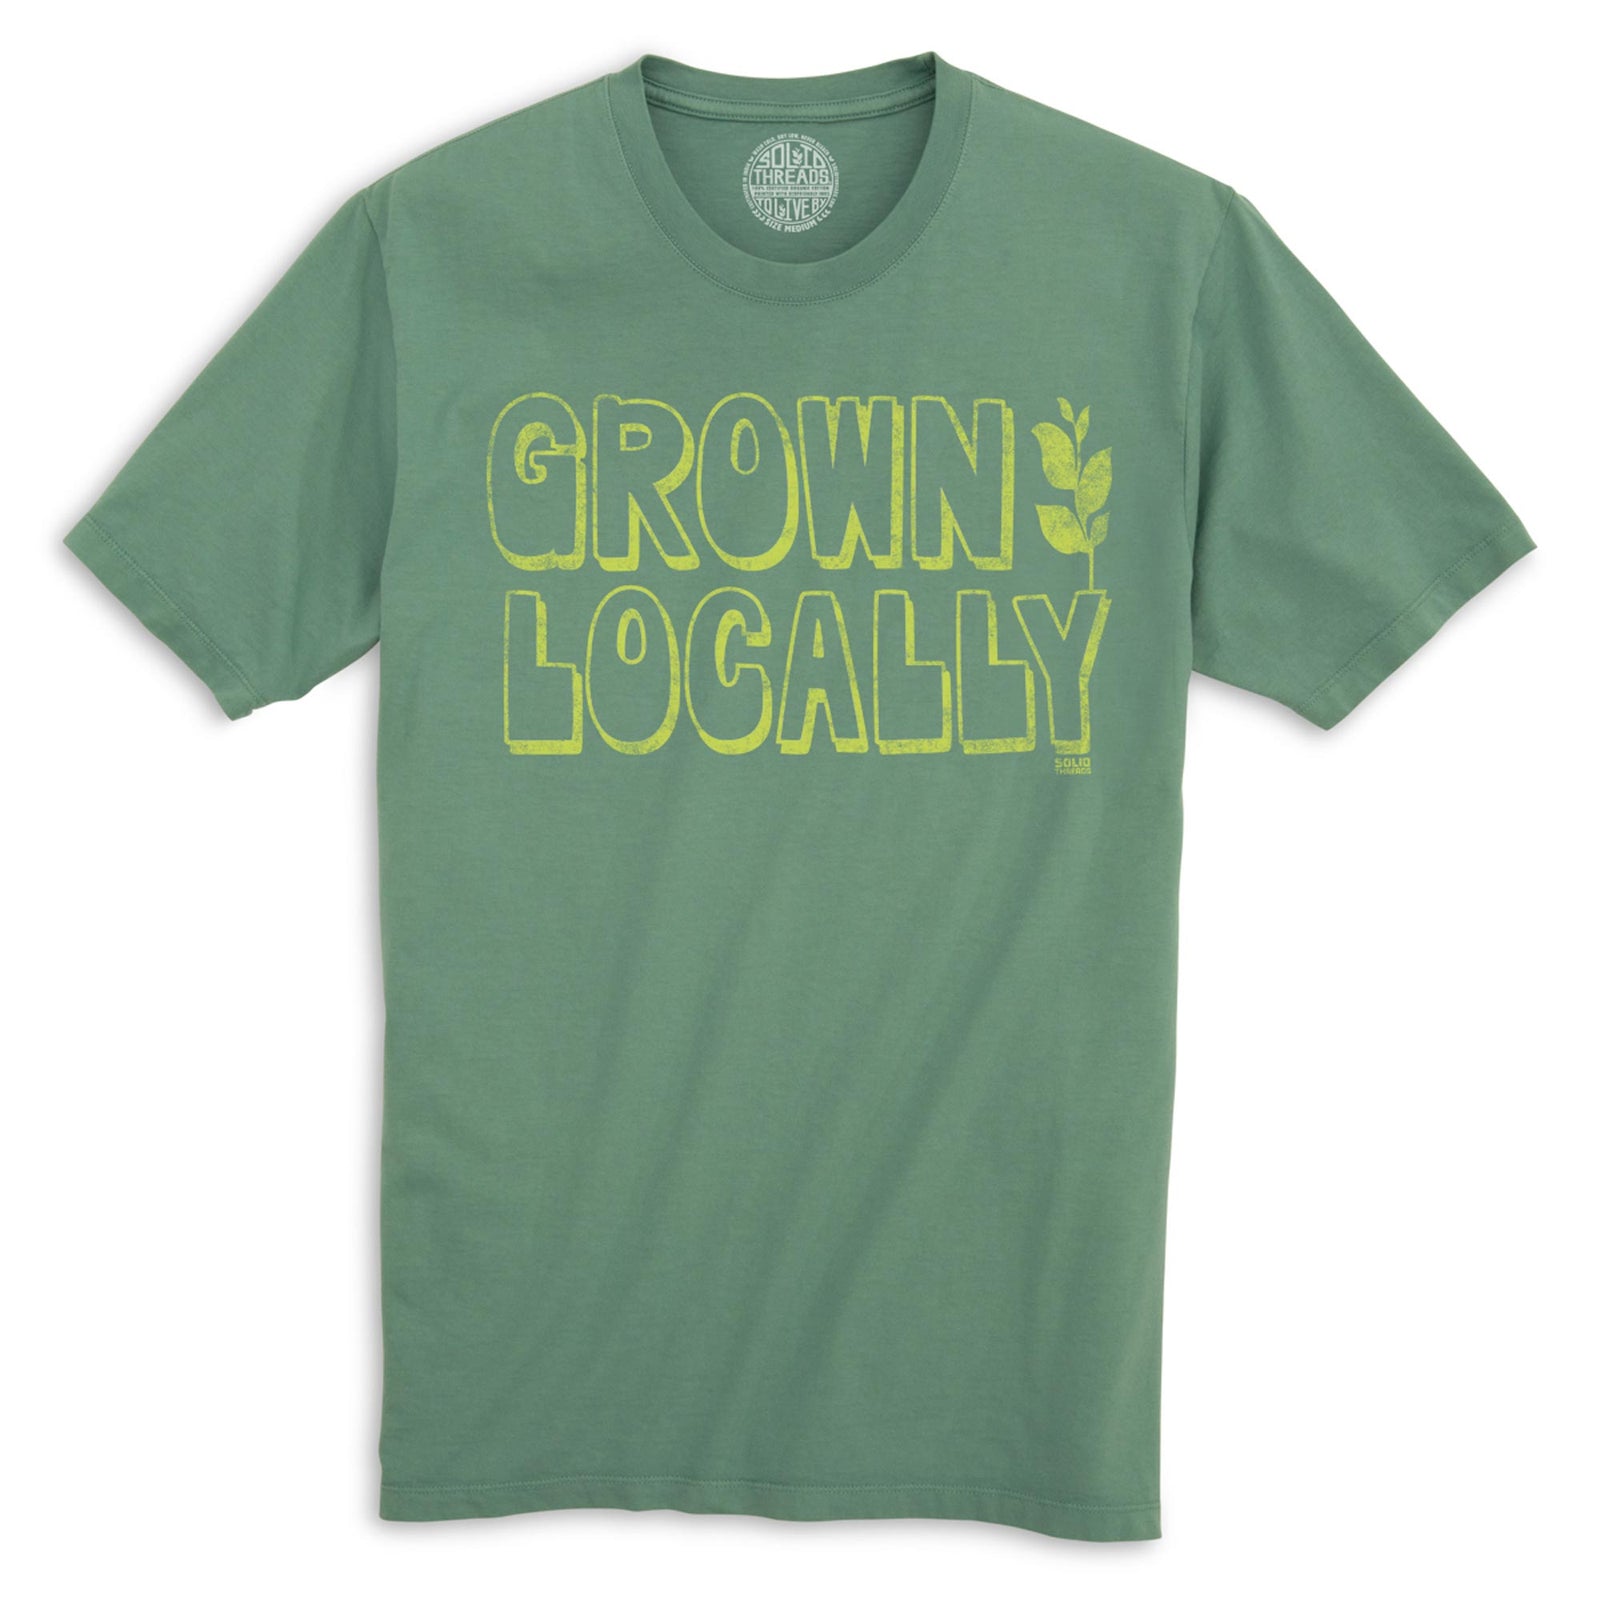 Grown Locally Cool Organic Cotton T-shirt | Vintage Farm To Table Tee | Solid Threads